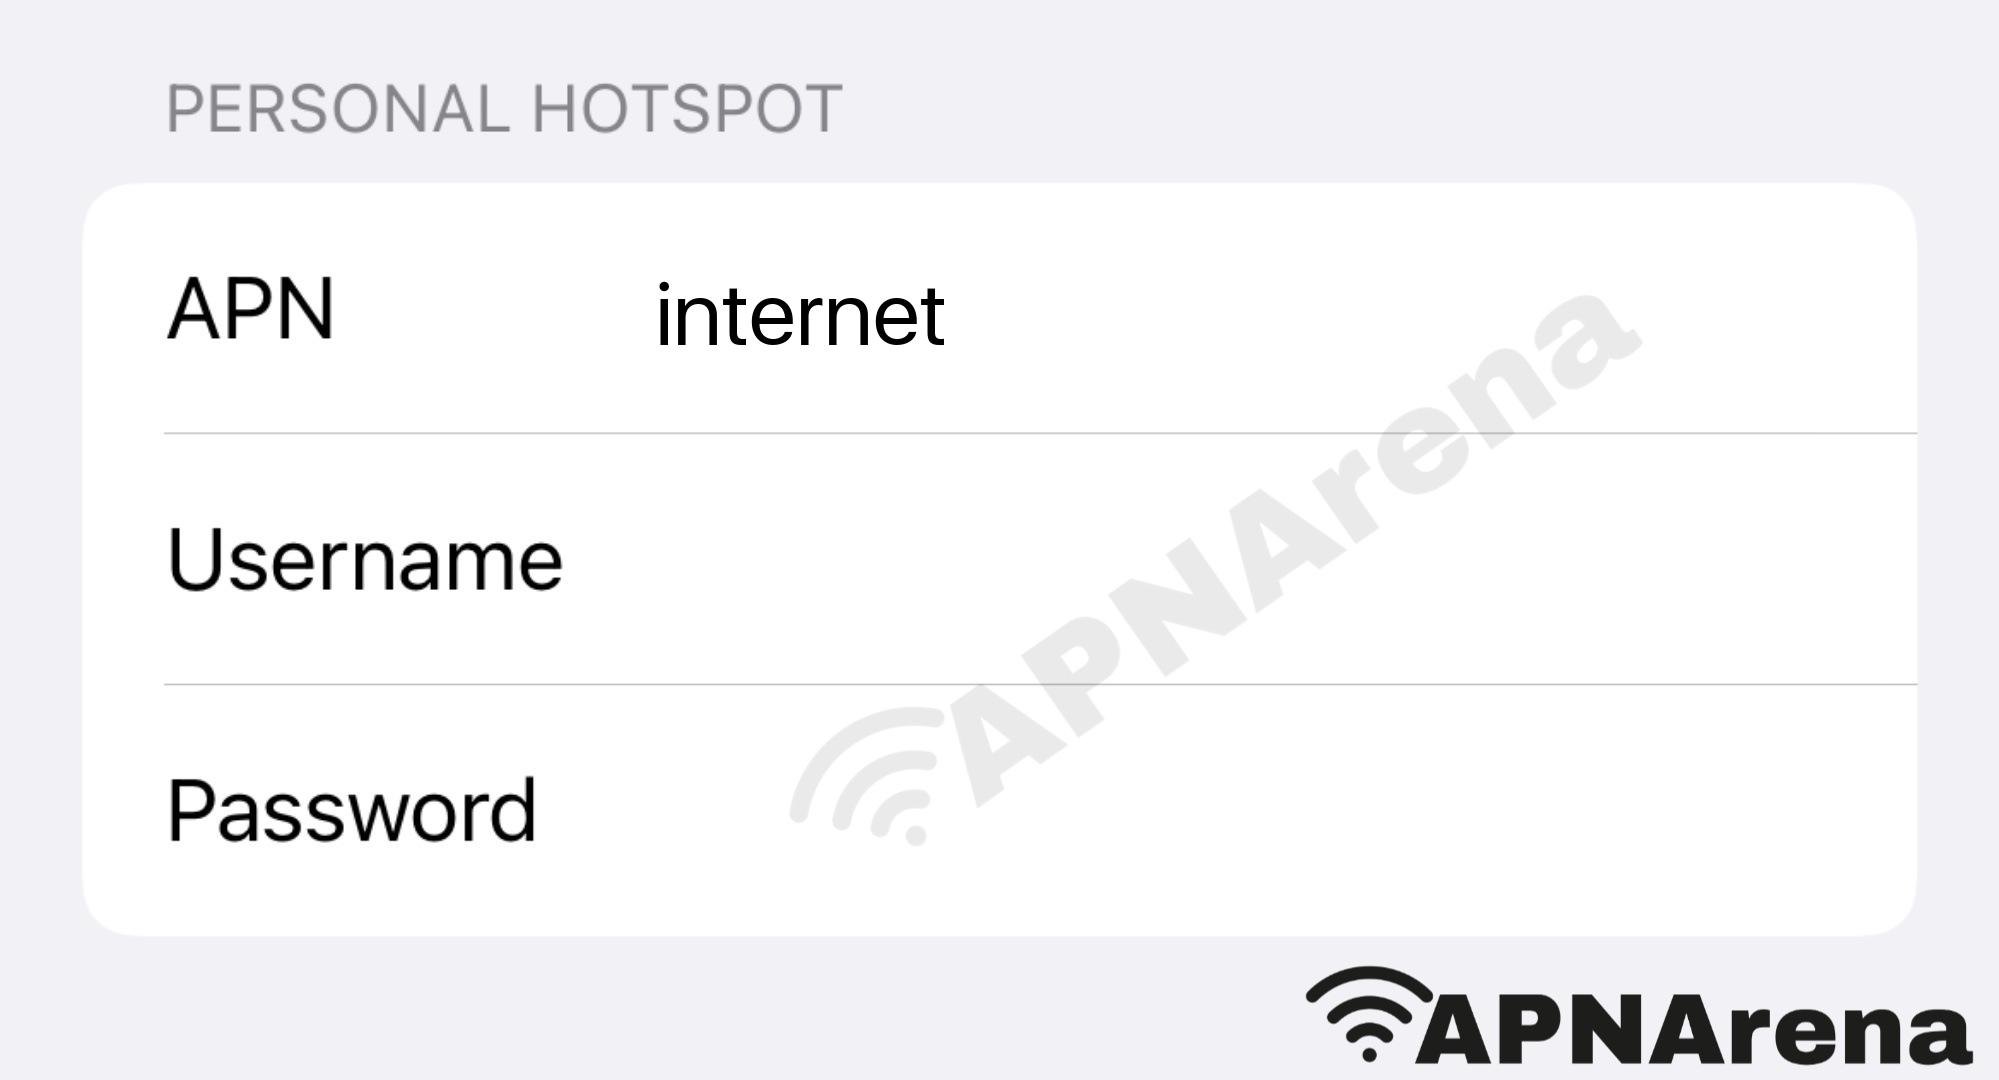 Firefly Mobile Personal Hotspot Settings for iPhone